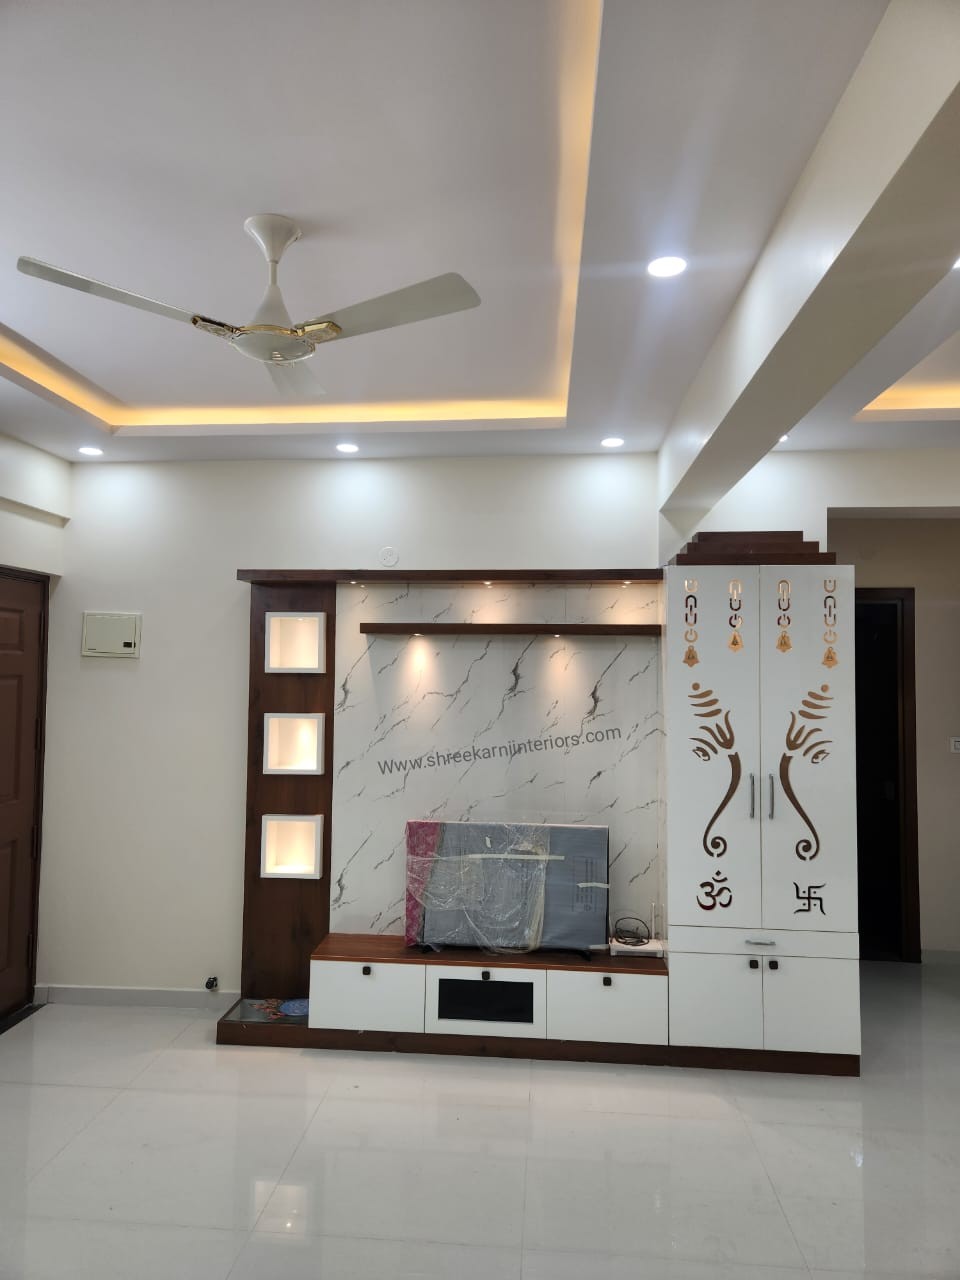 All Interior Works